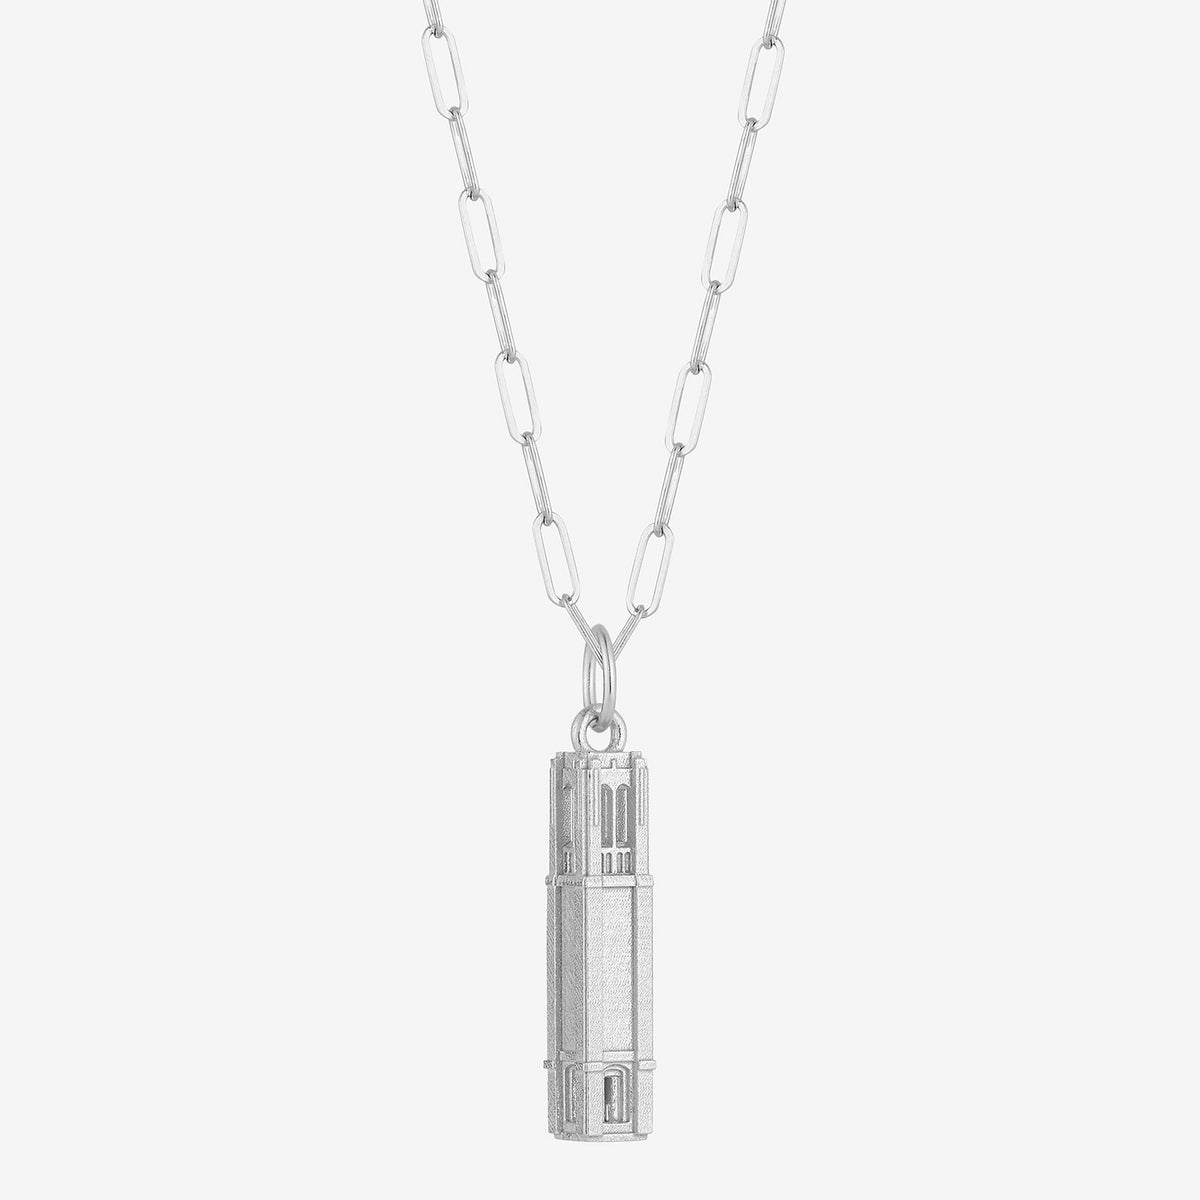 Florida Century Tower Pendant with Cable Chain